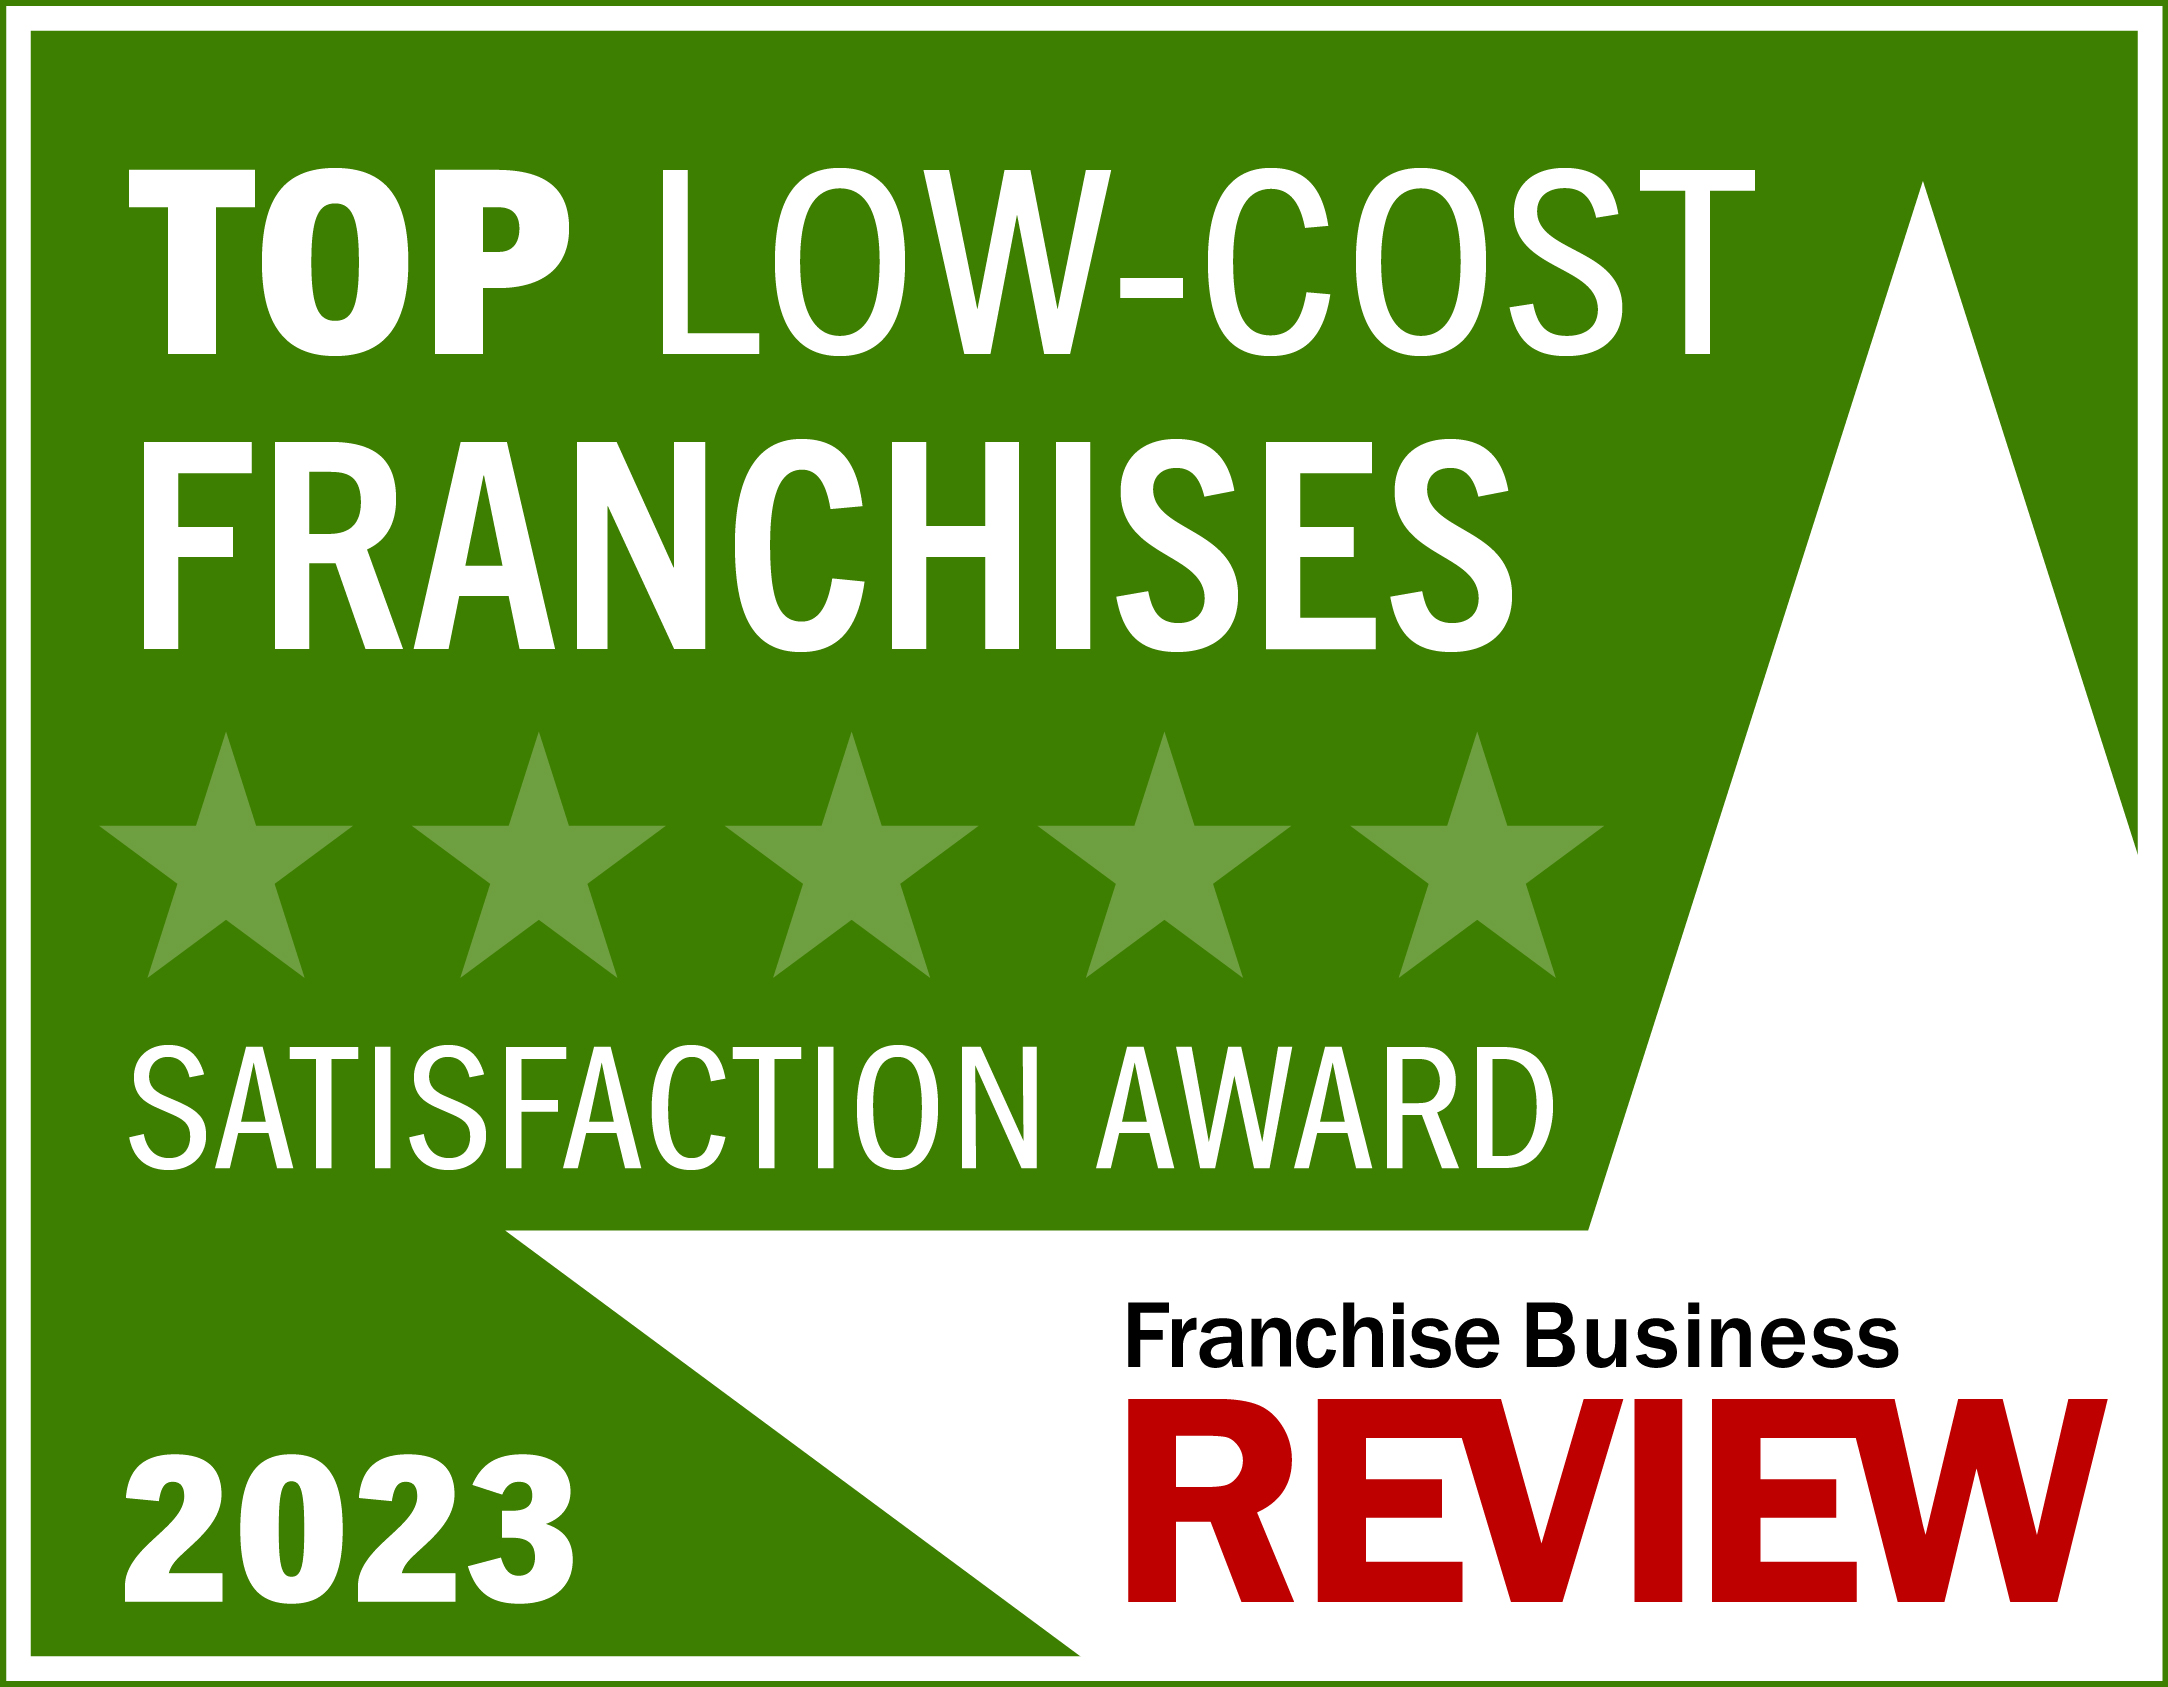 Franchise Business Review Low Cost Franchises 2023